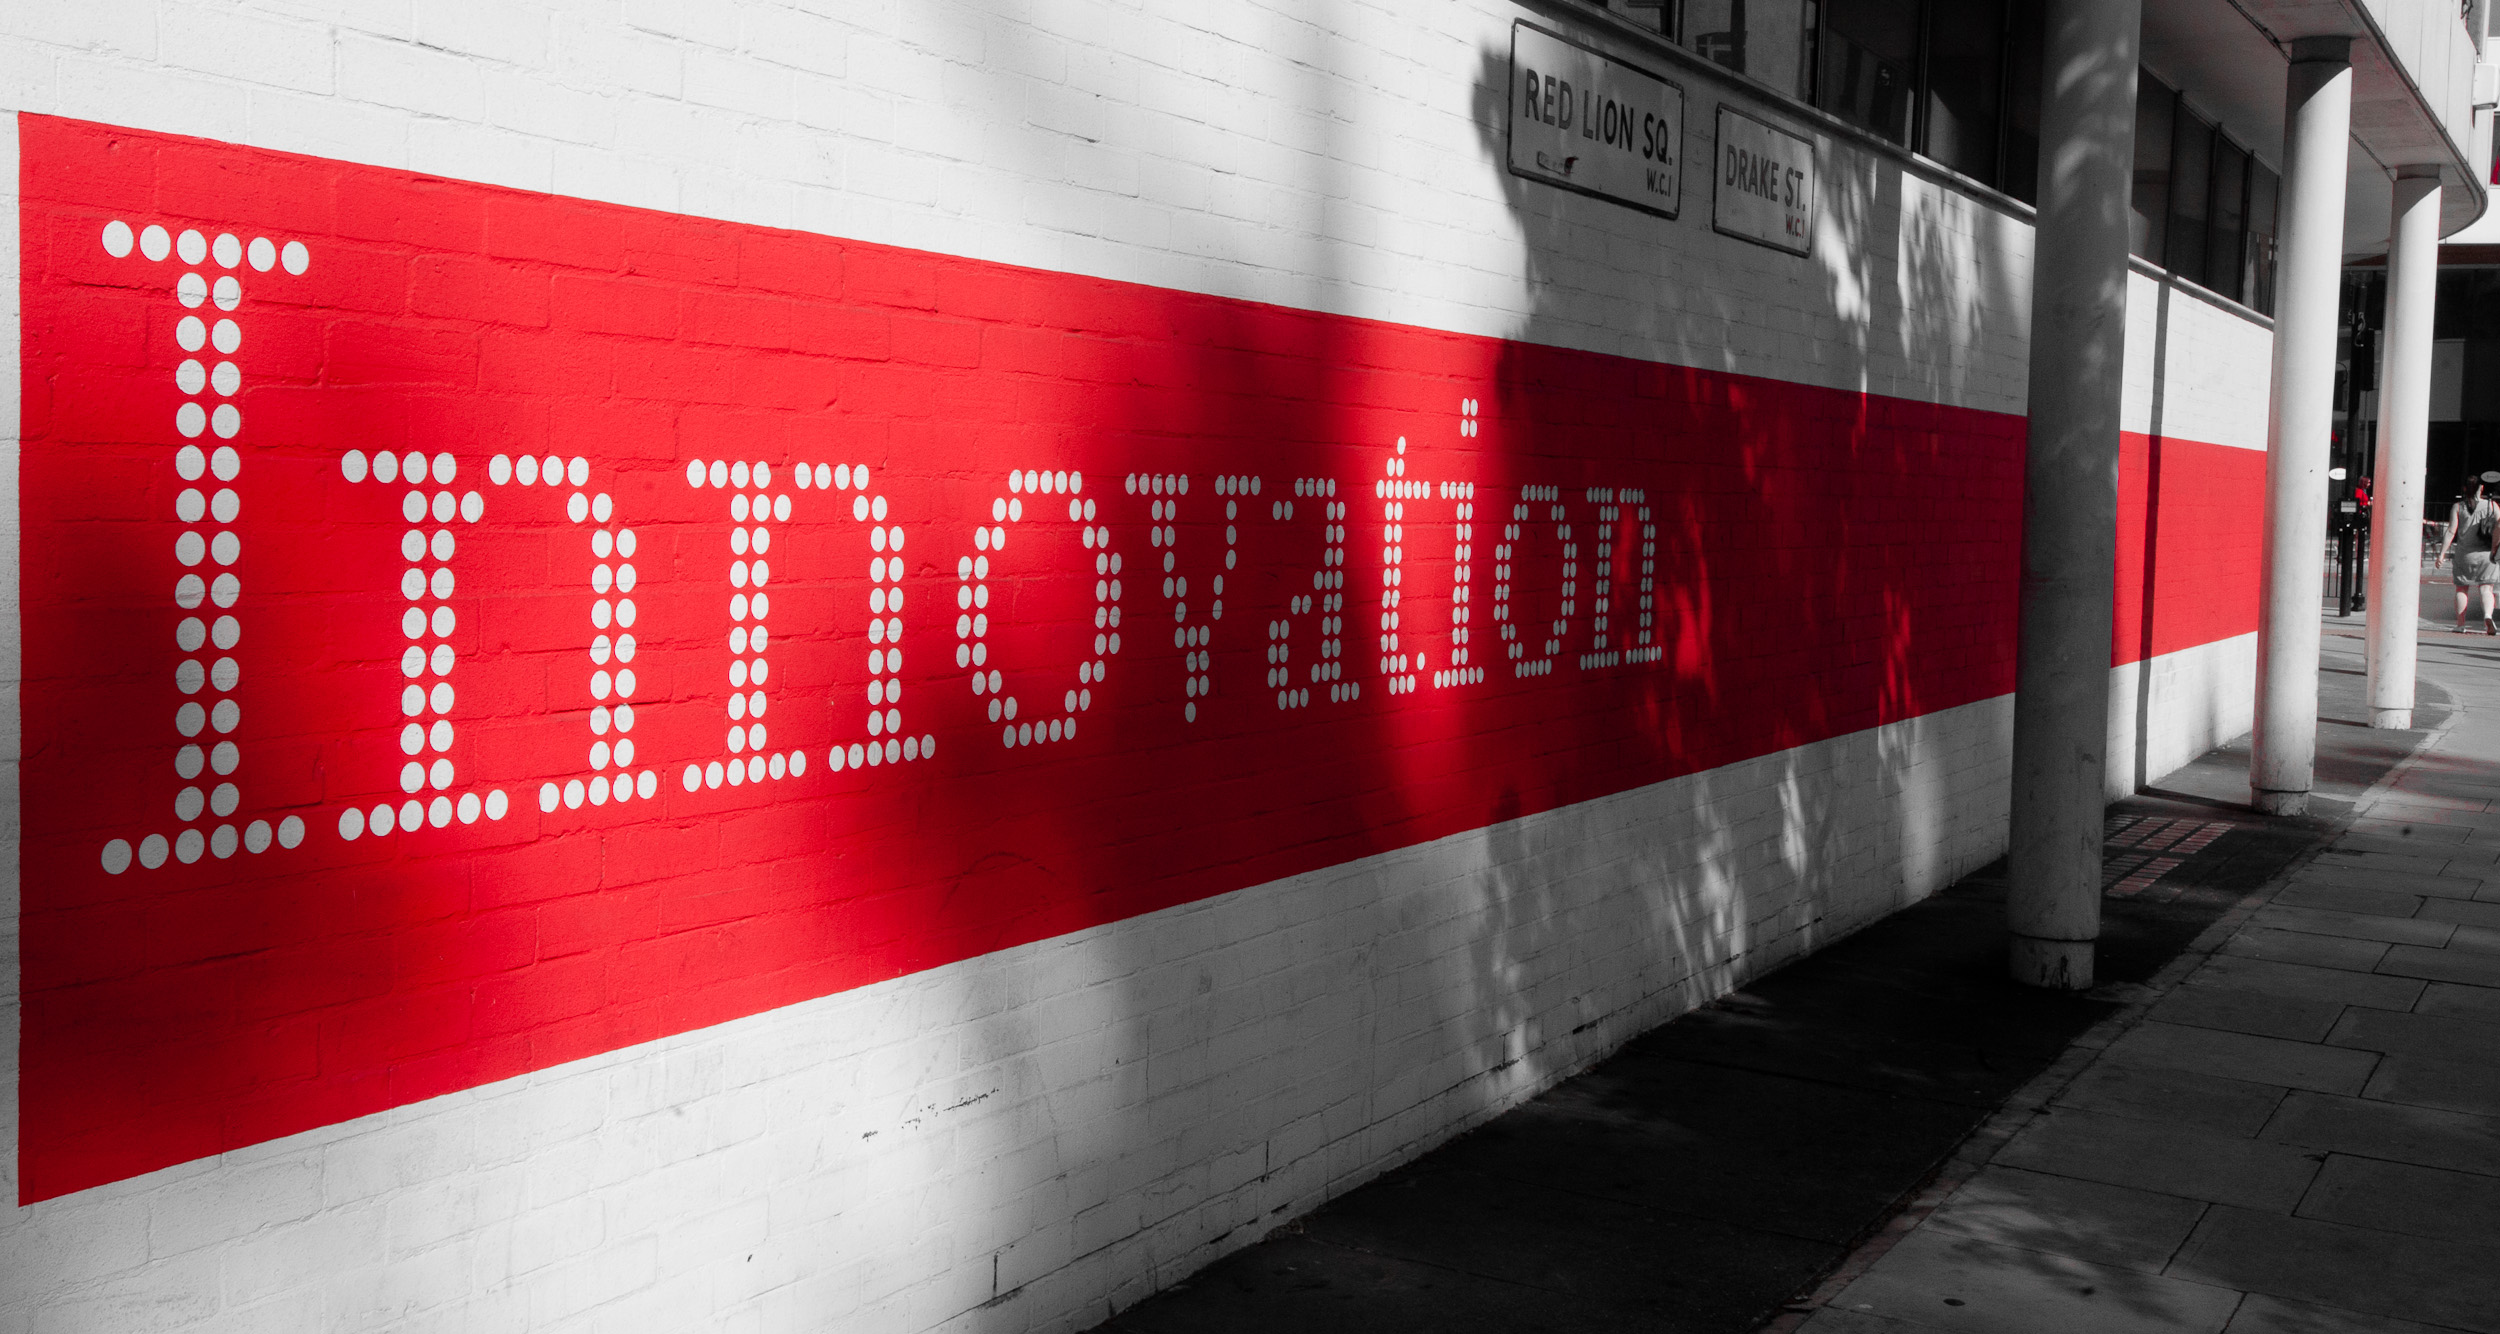 Innovation, by Boegh on Flickr